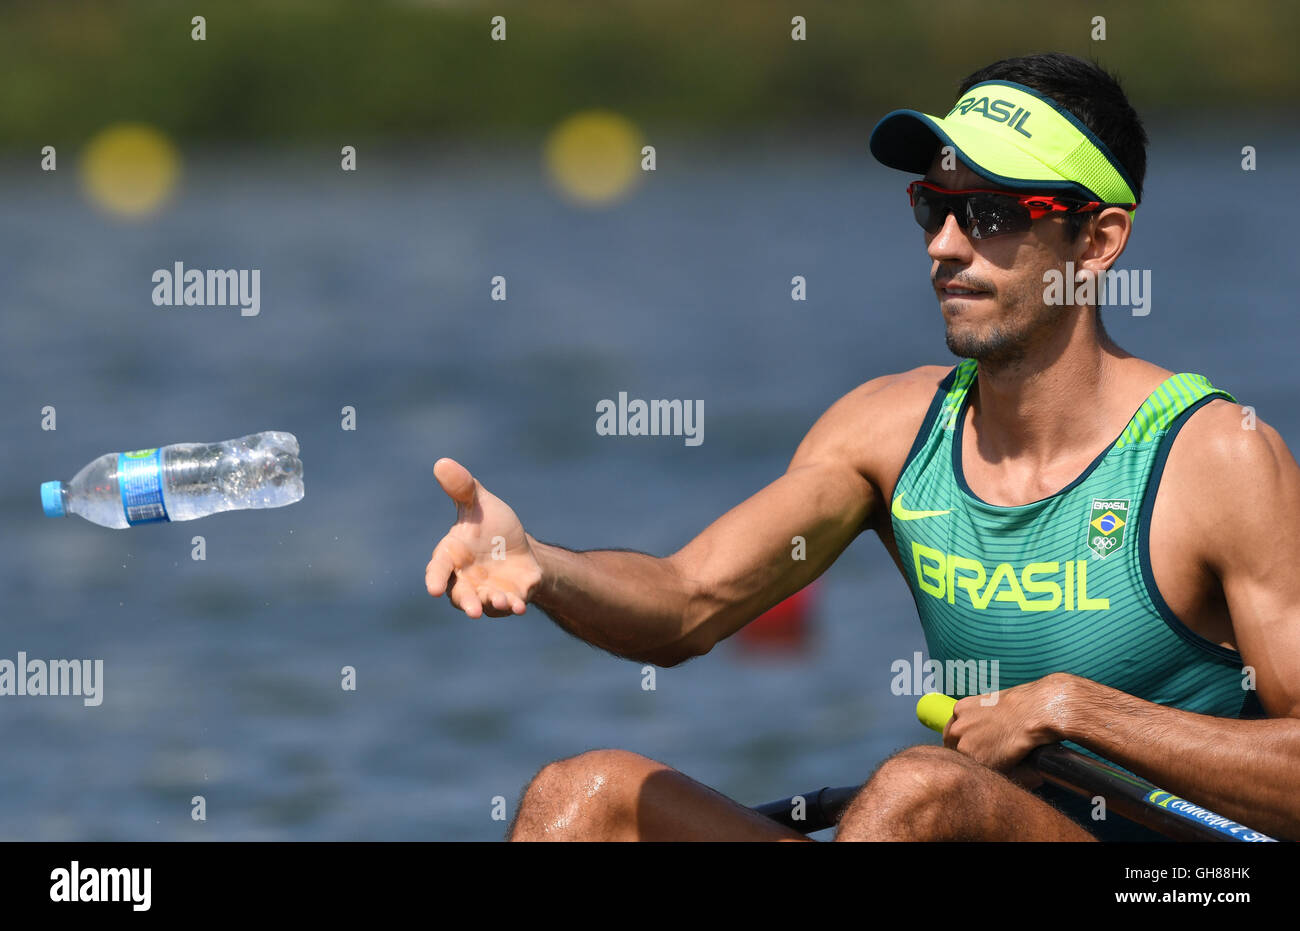 Rio de Janeiro, Brazil. 9th Aug, 2016. Xavier Vela Maggi of Brazil in action during the LWT Men's Double Sculls Repenache of the Rowing events during the Rio 2016 Olympic Games at Lagoa Stadium in Rio de Janeiro, Brazil, 9 August 2016. Photo: Soeren Stache/dpa/Alamy Live News Stock Photo